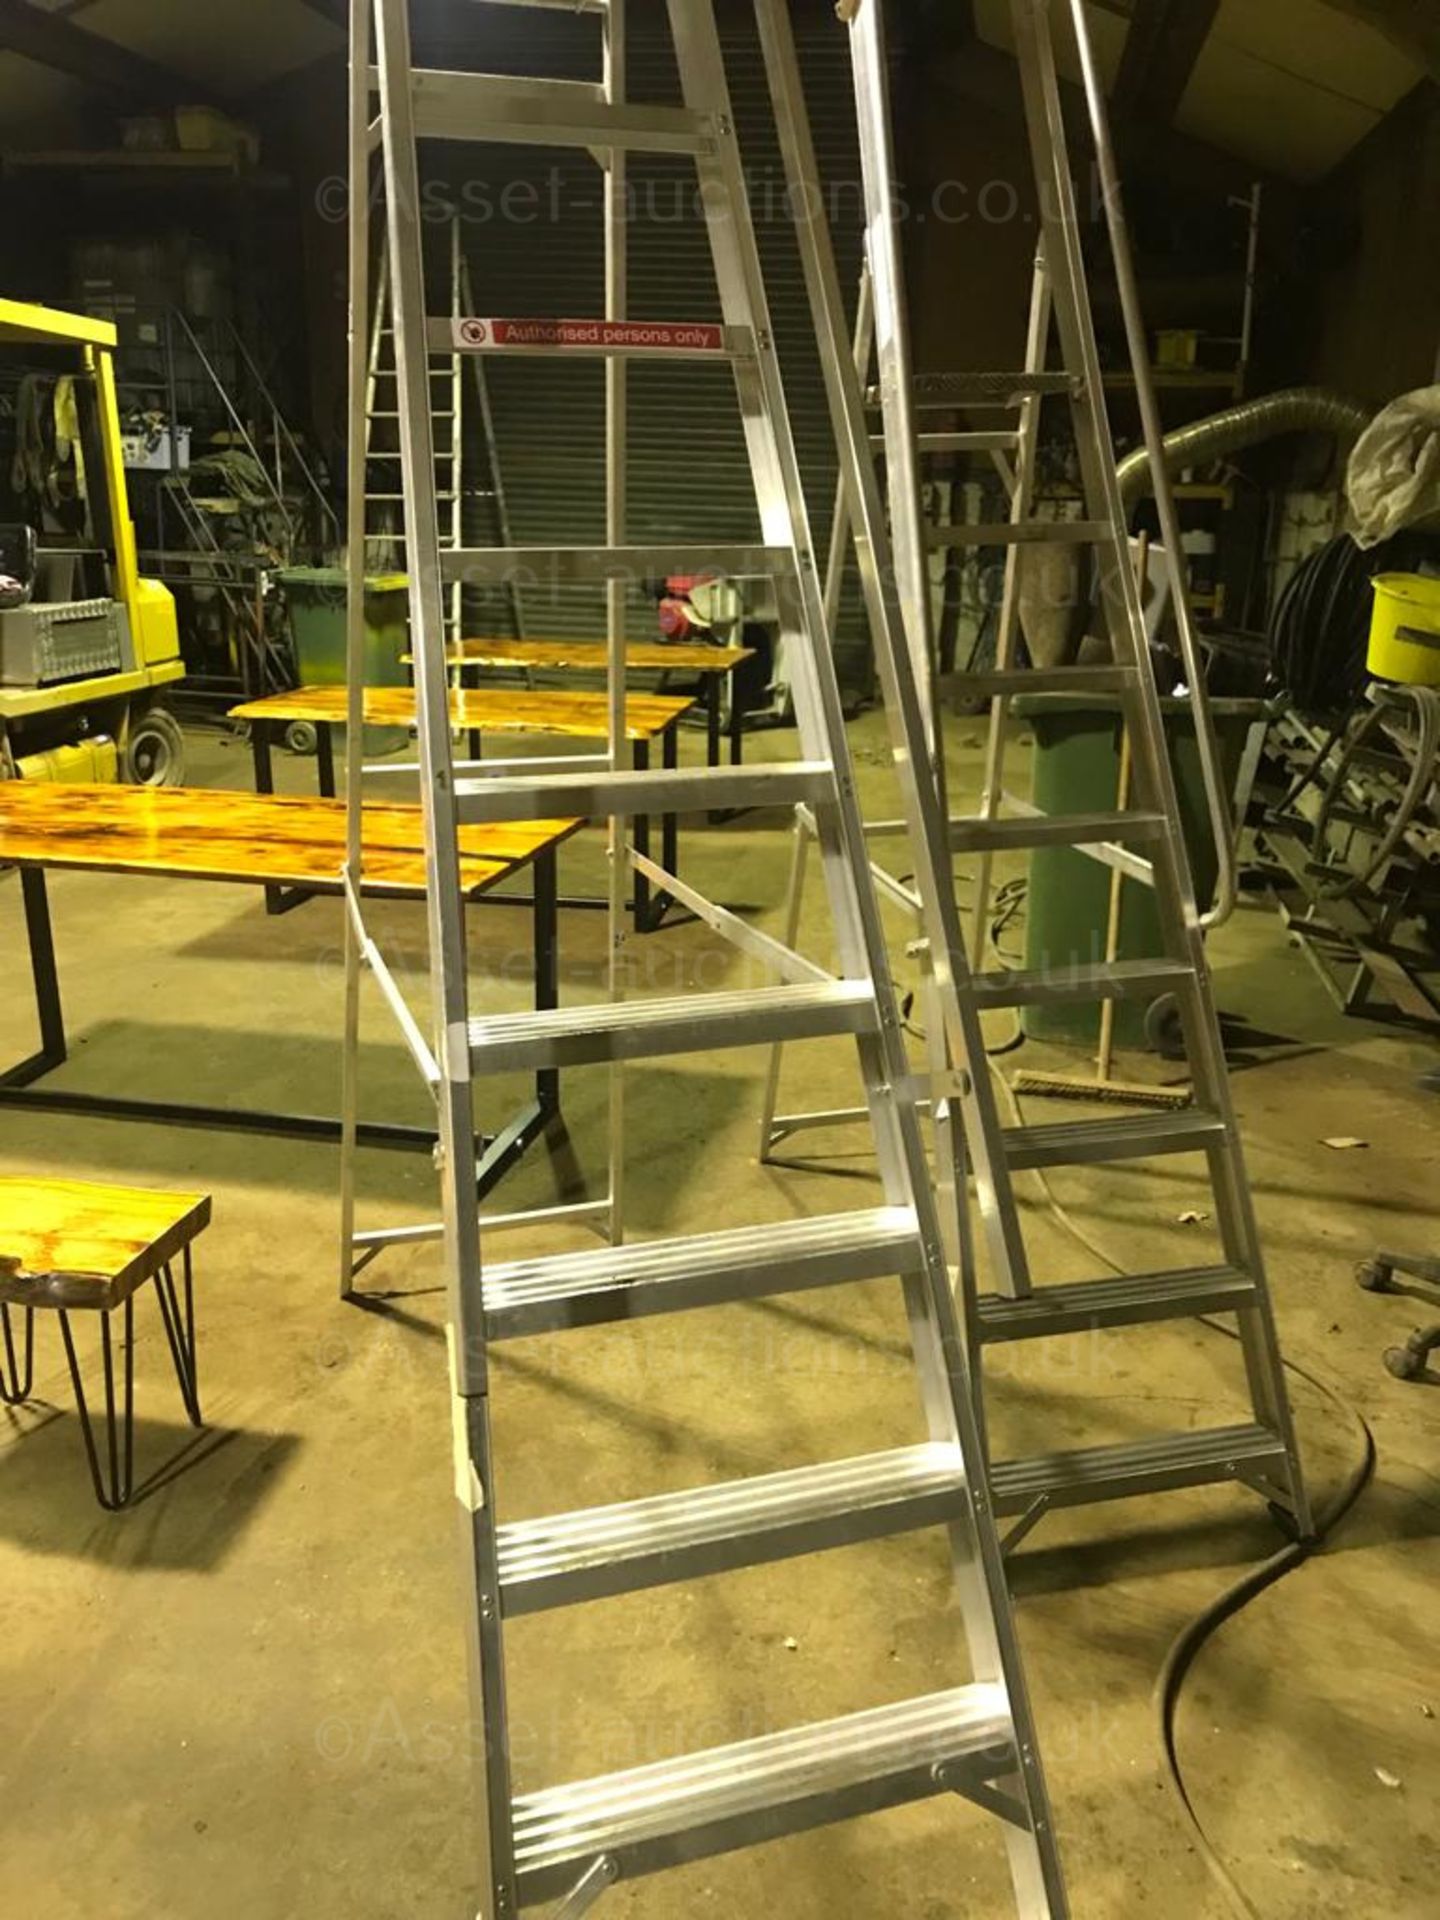 2 SETS OF INDUSTRIAL LADDERS, IN NEW CONDITION, FROM B&Q DEPOT *NO VAT* - Image 4 of 6